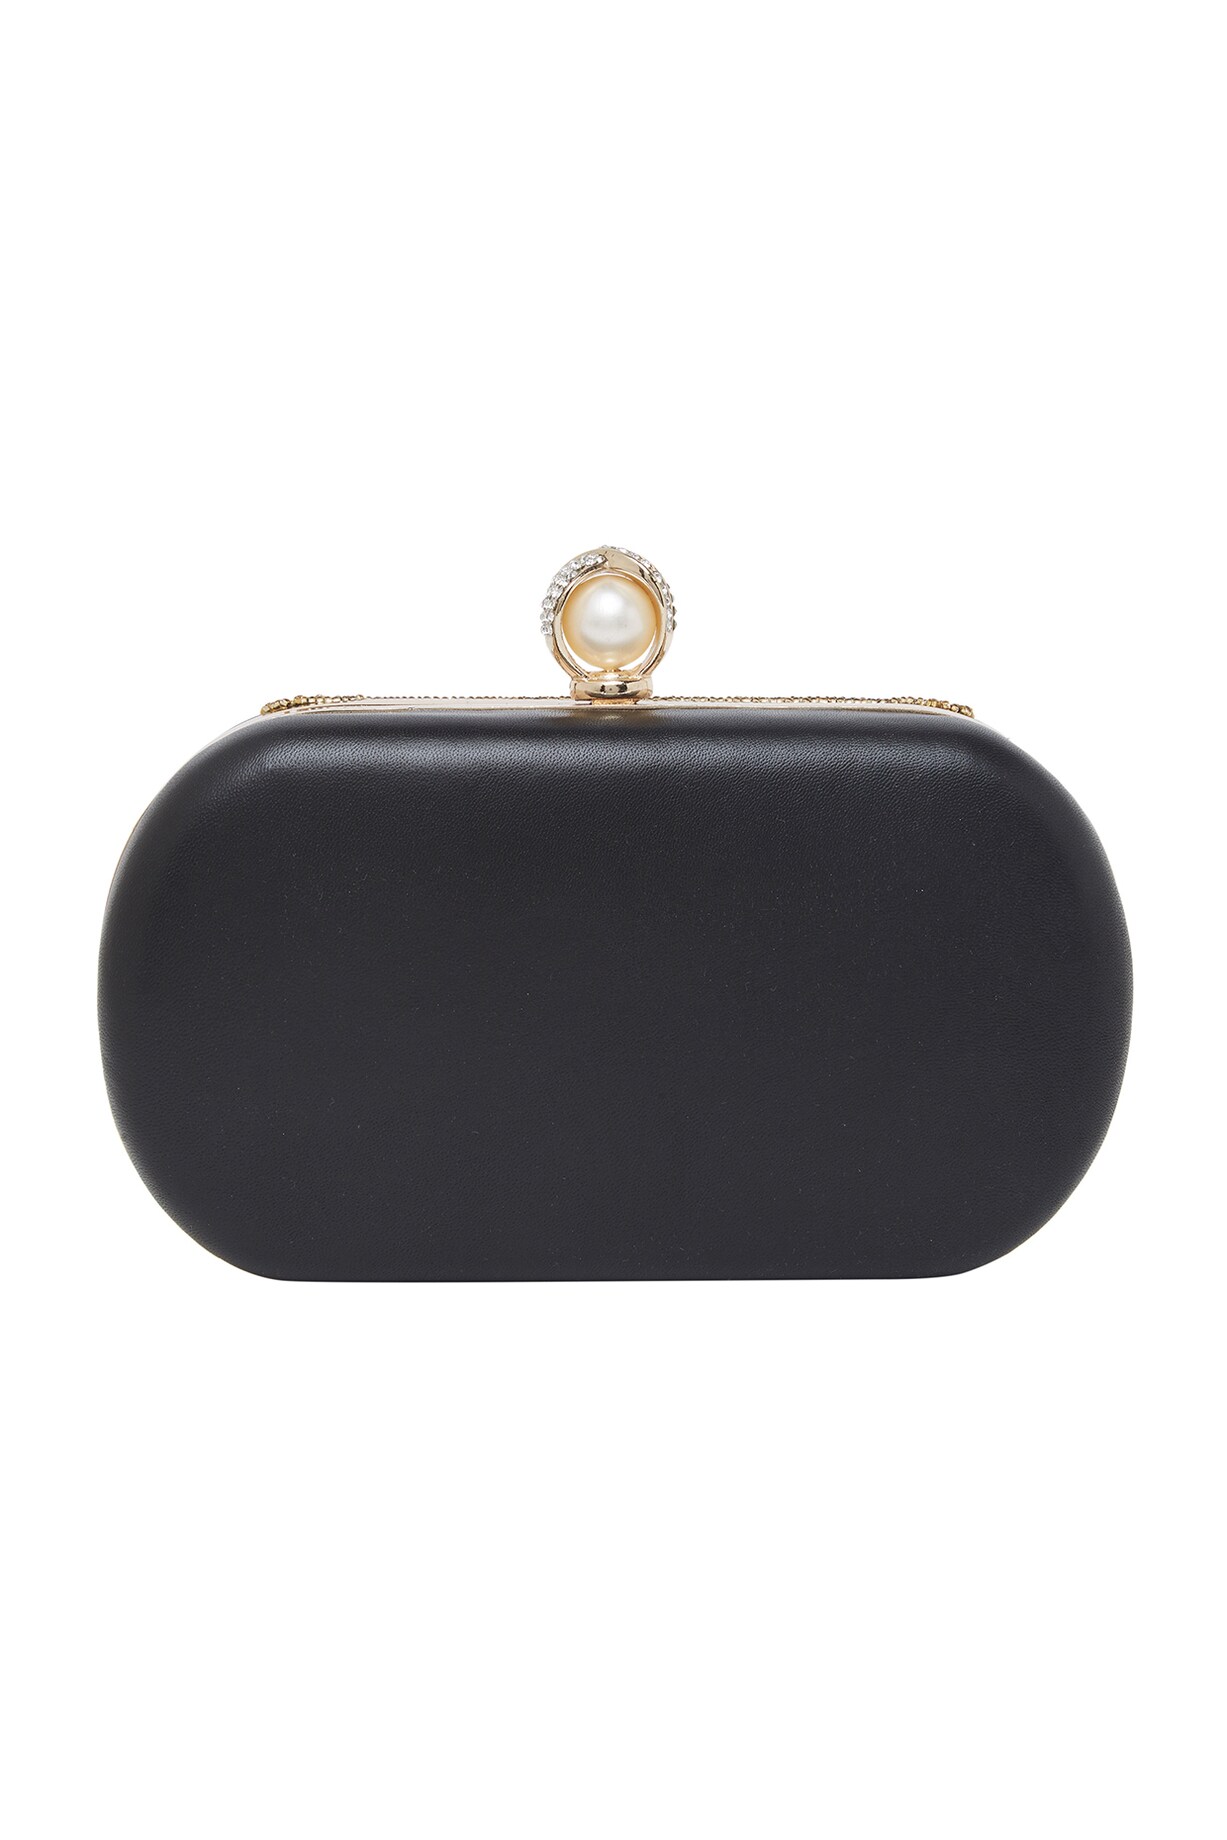 Black Embroidered Clutch with designer knob and handle